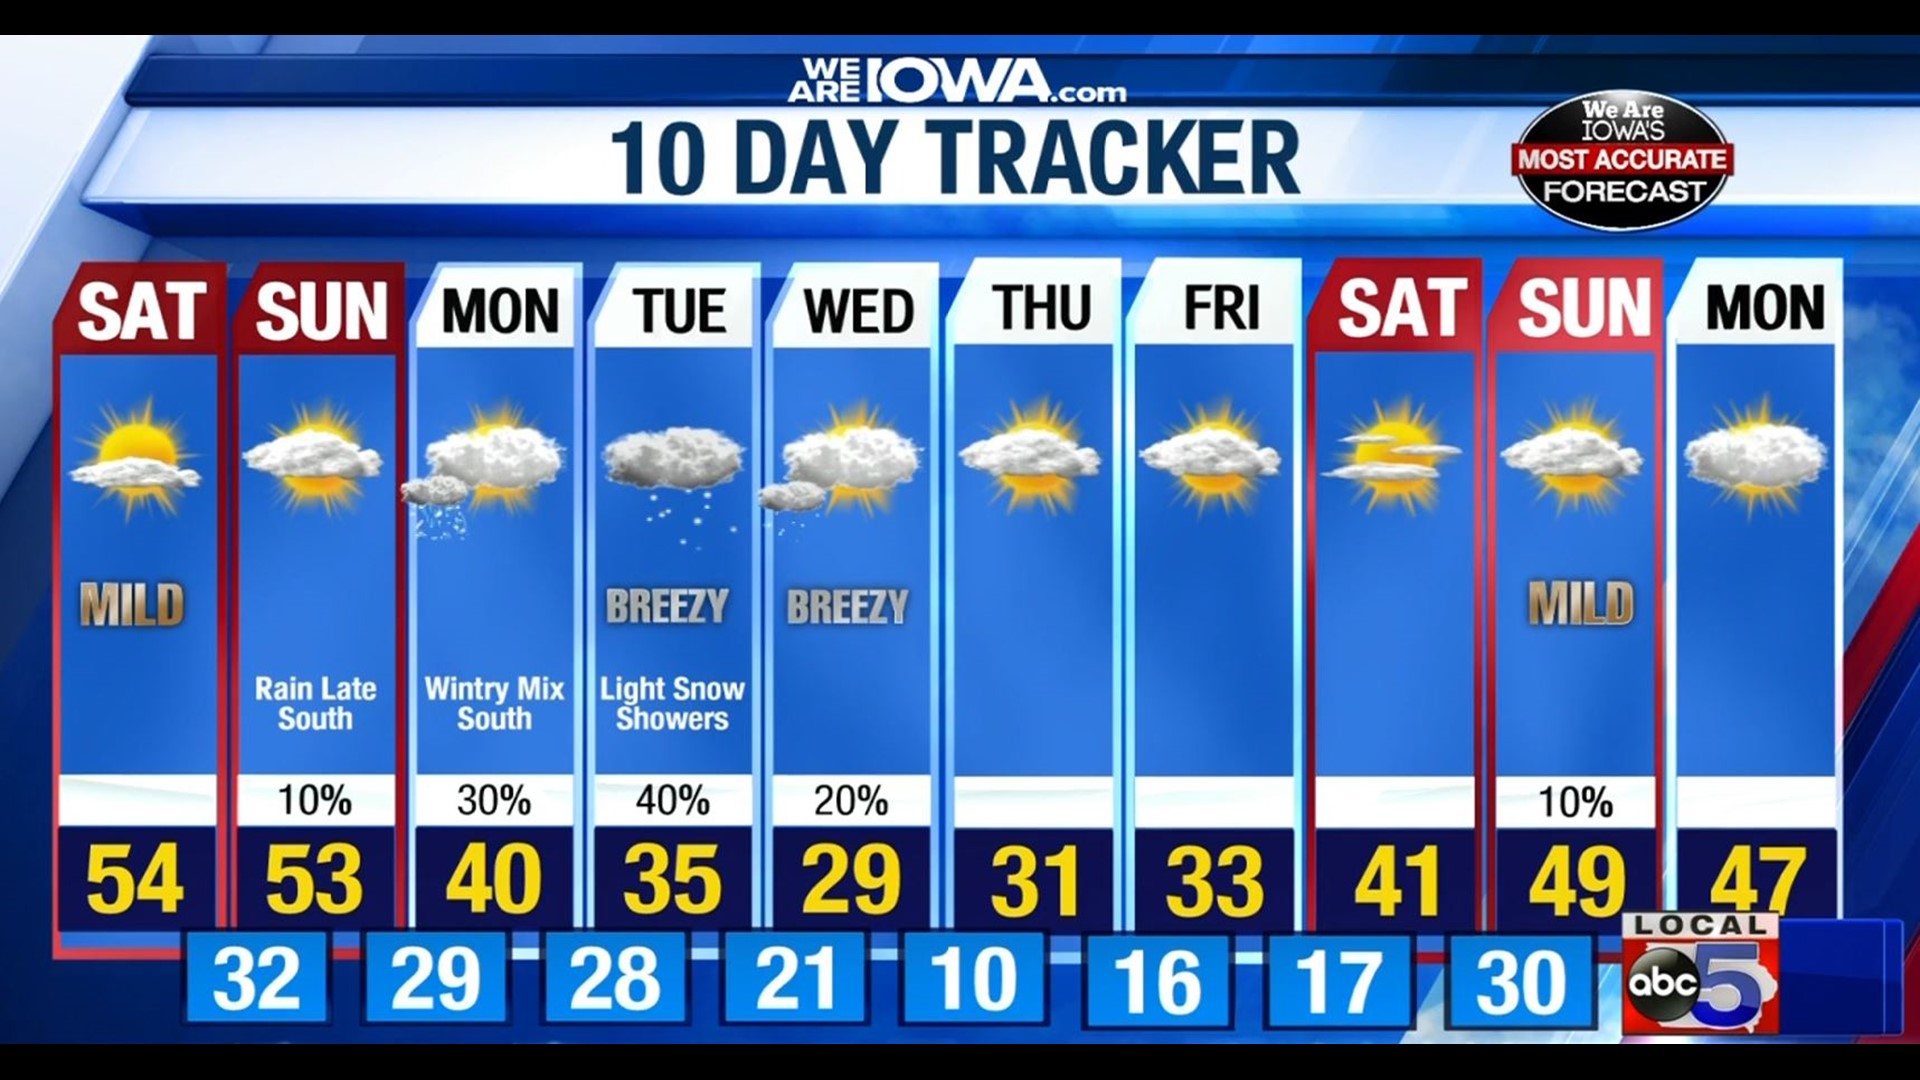 Meteorologist Brandon Lawrence has the latest central Iowa weather forecast.